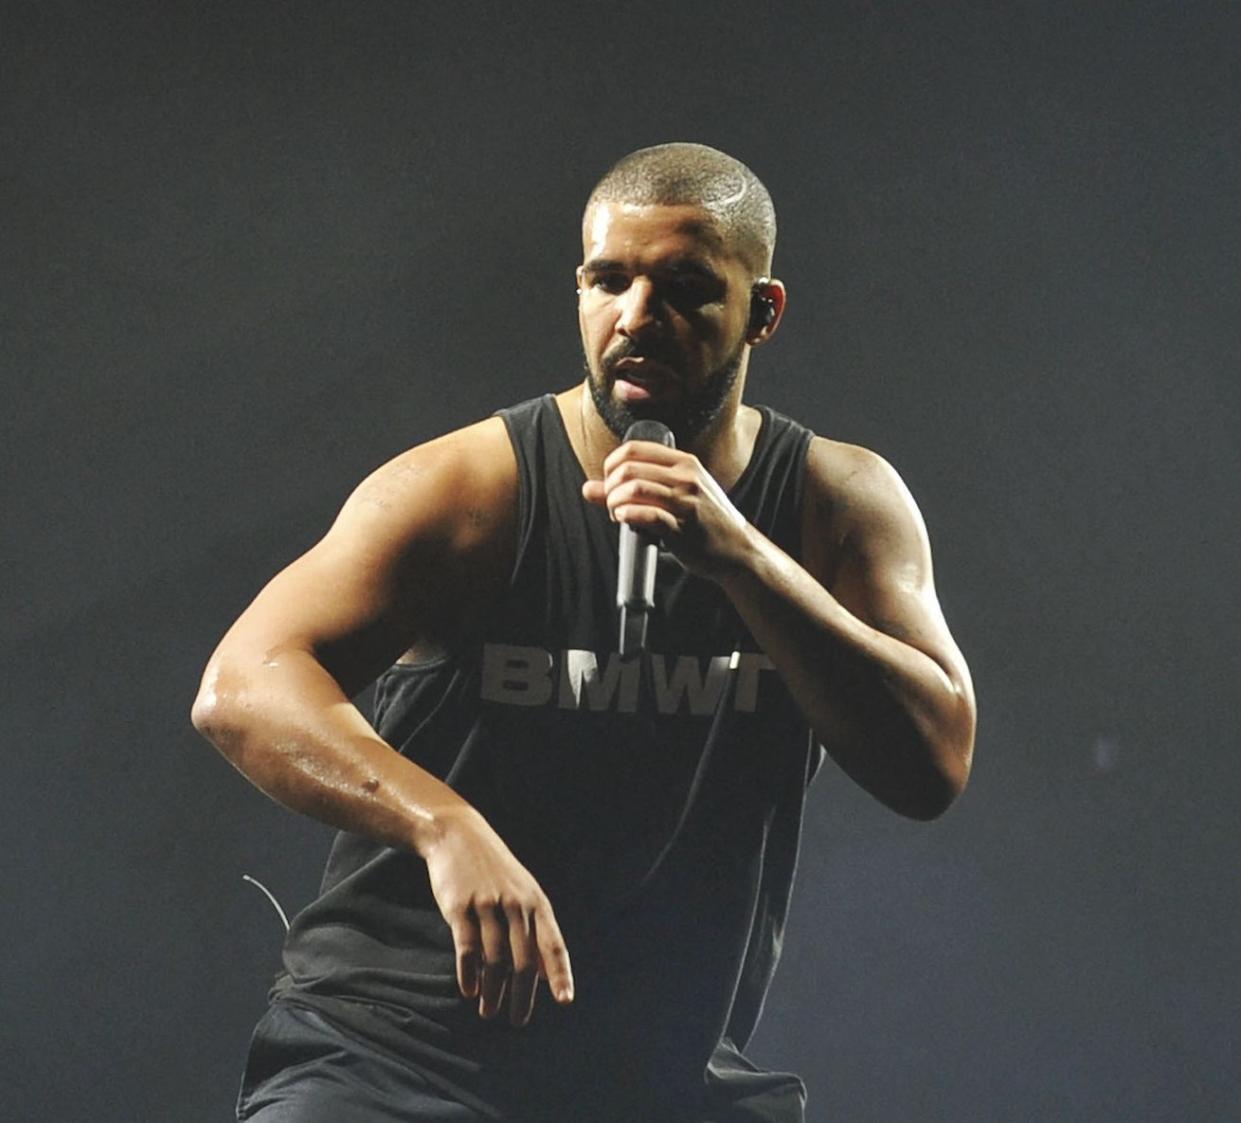 FEATURED - All About Woman Who Threw Bra Onstage During Drake Show